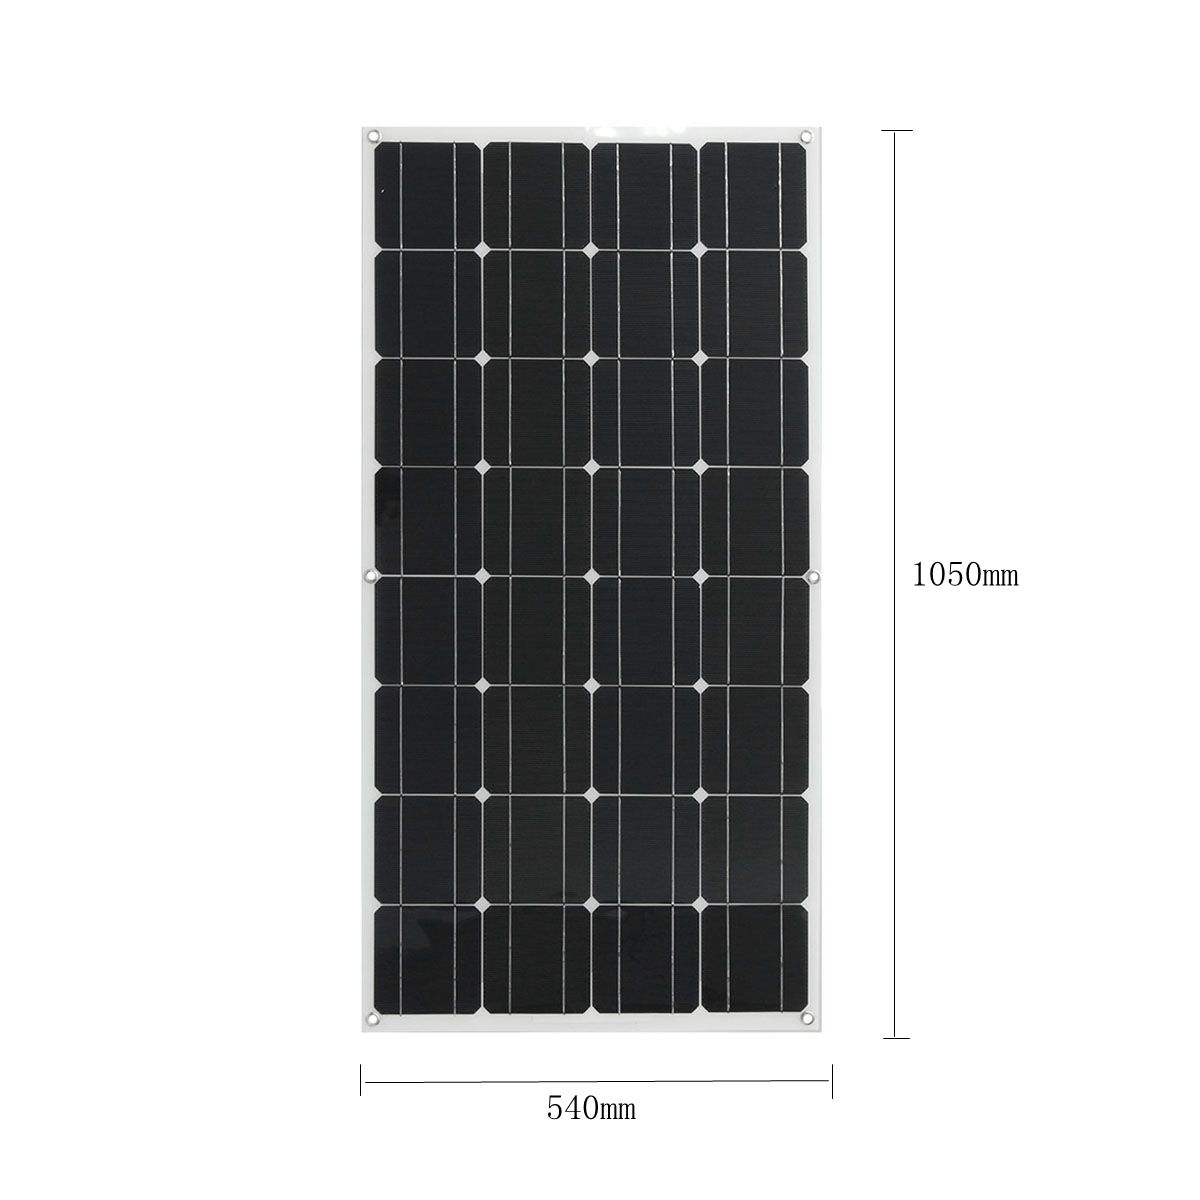 Elfeland® SP-38 18V 100W 1050x540x2.5mm Flexible Solar Panel With 1.5m Cable 4